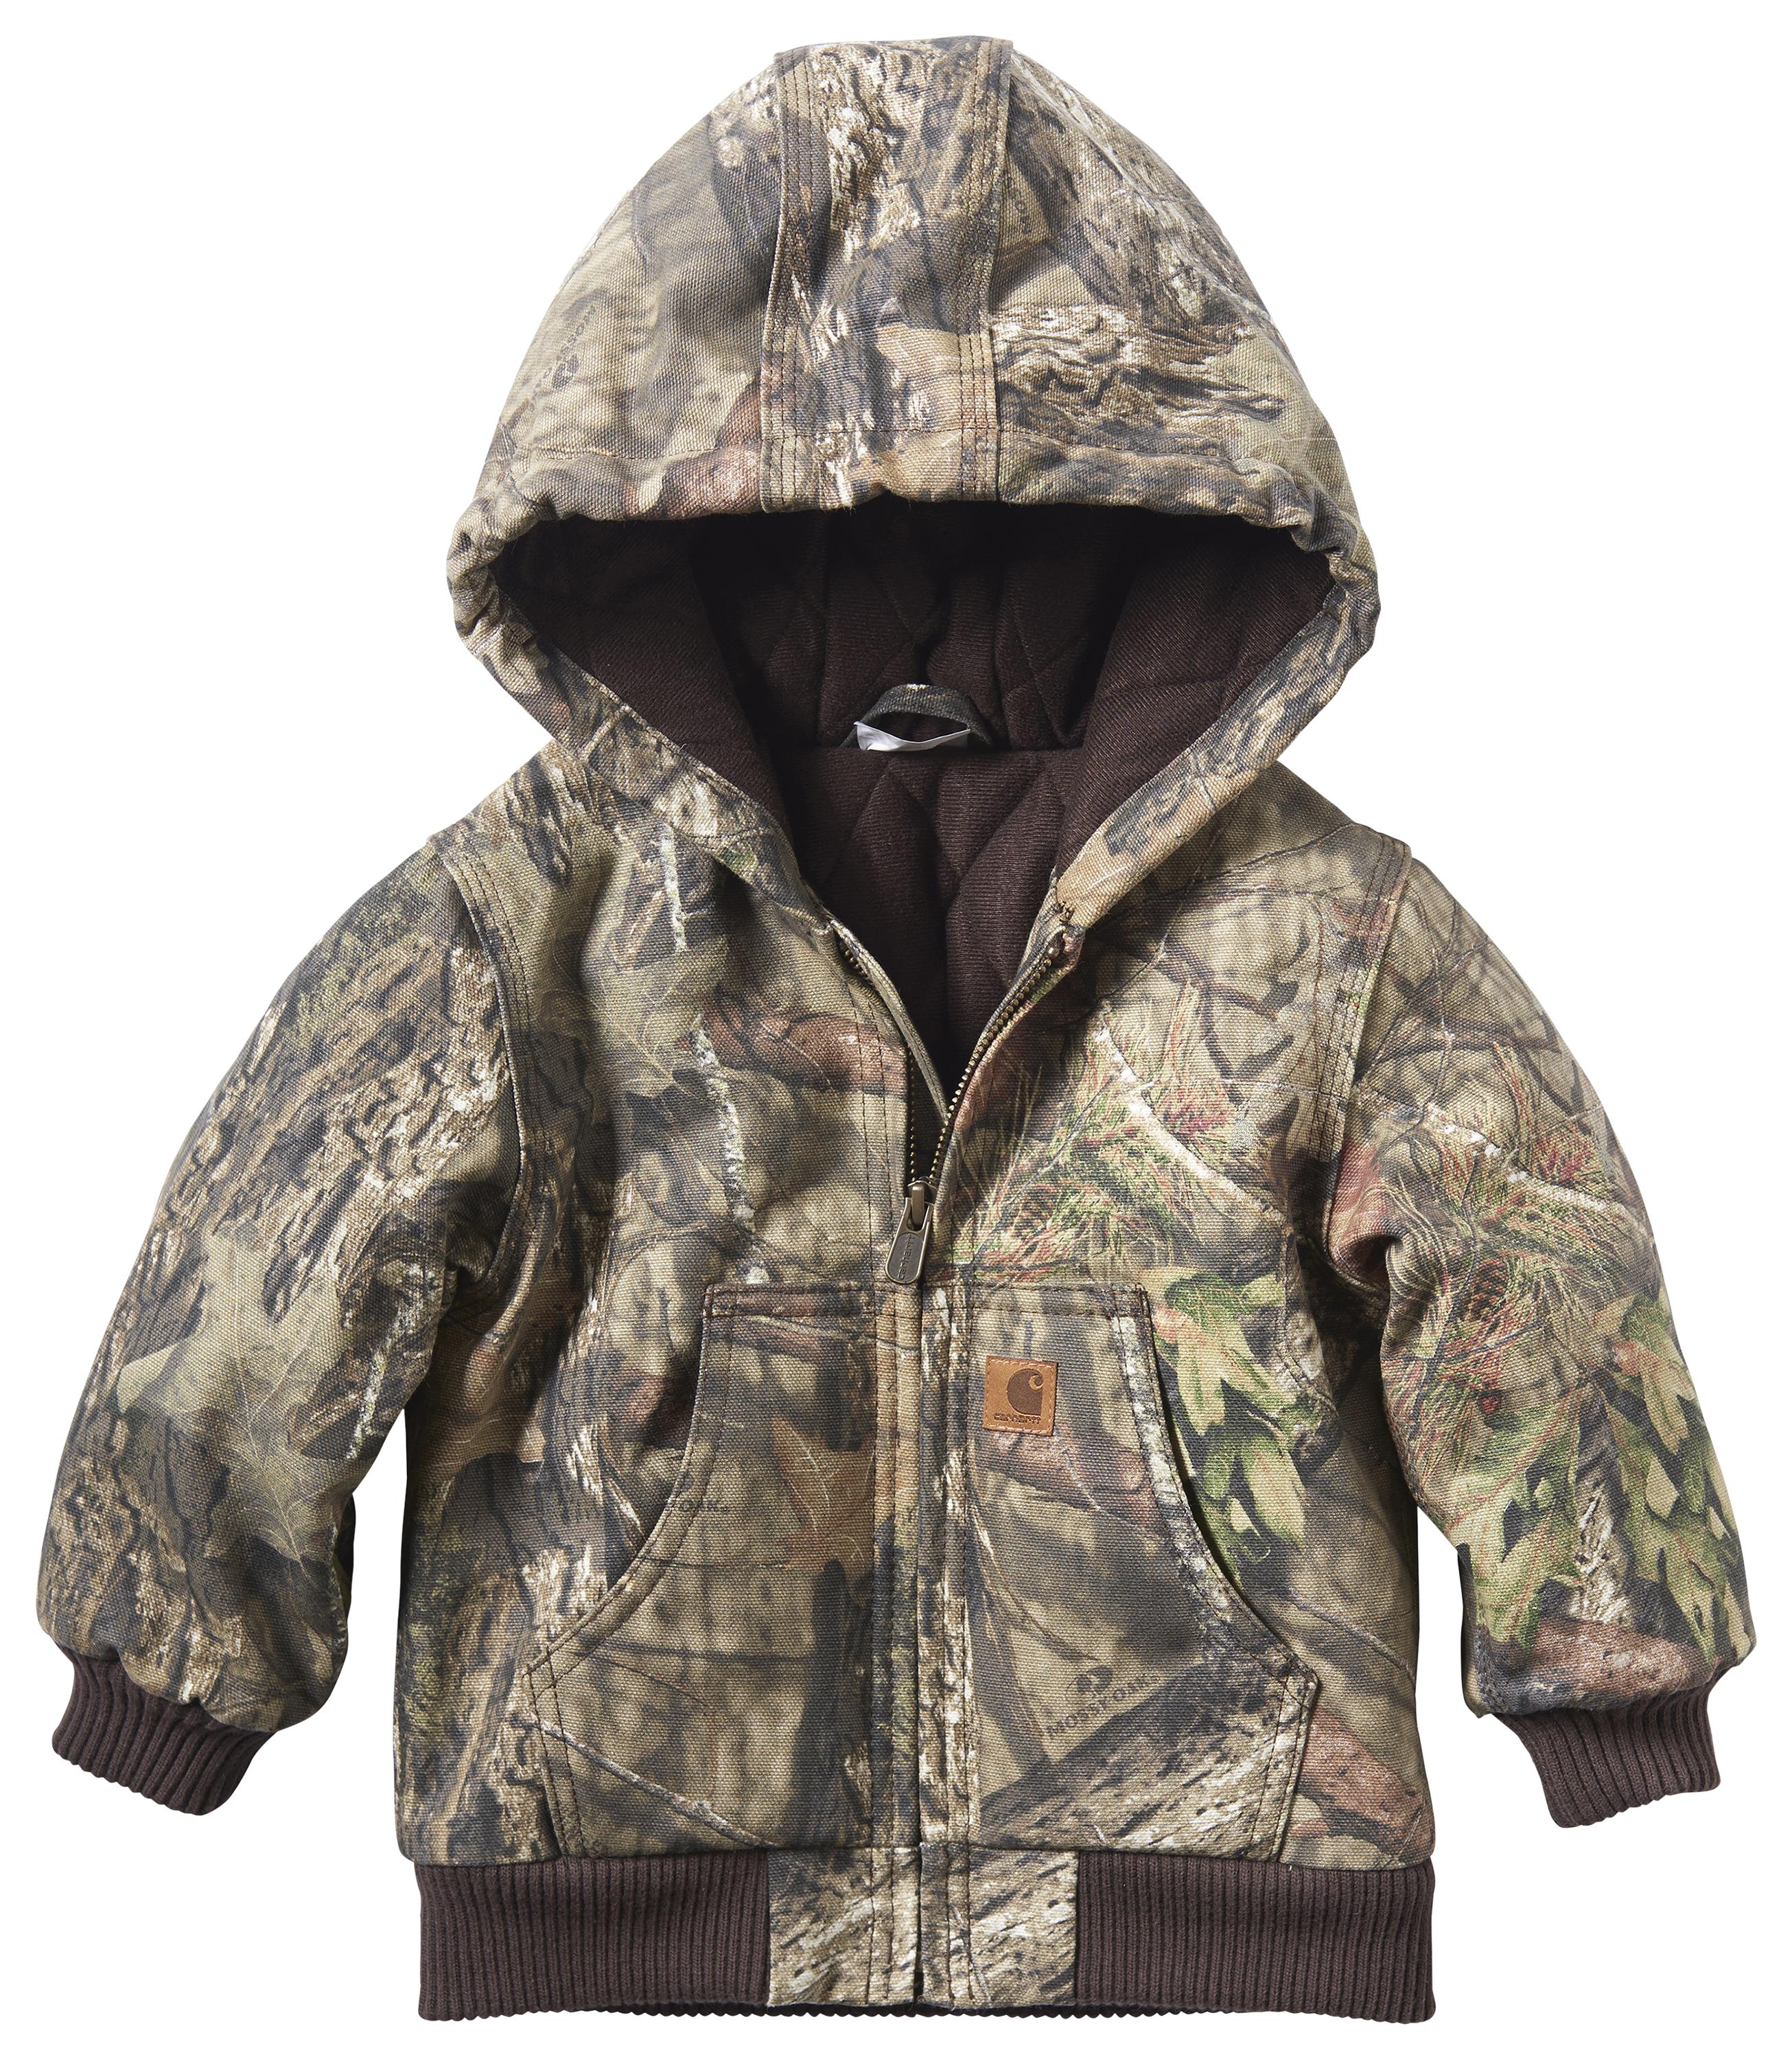 Carhartt Camo Active Flannel Quilt Lined Jacket for Babies Mossy Oak Break Up Country 6 Months